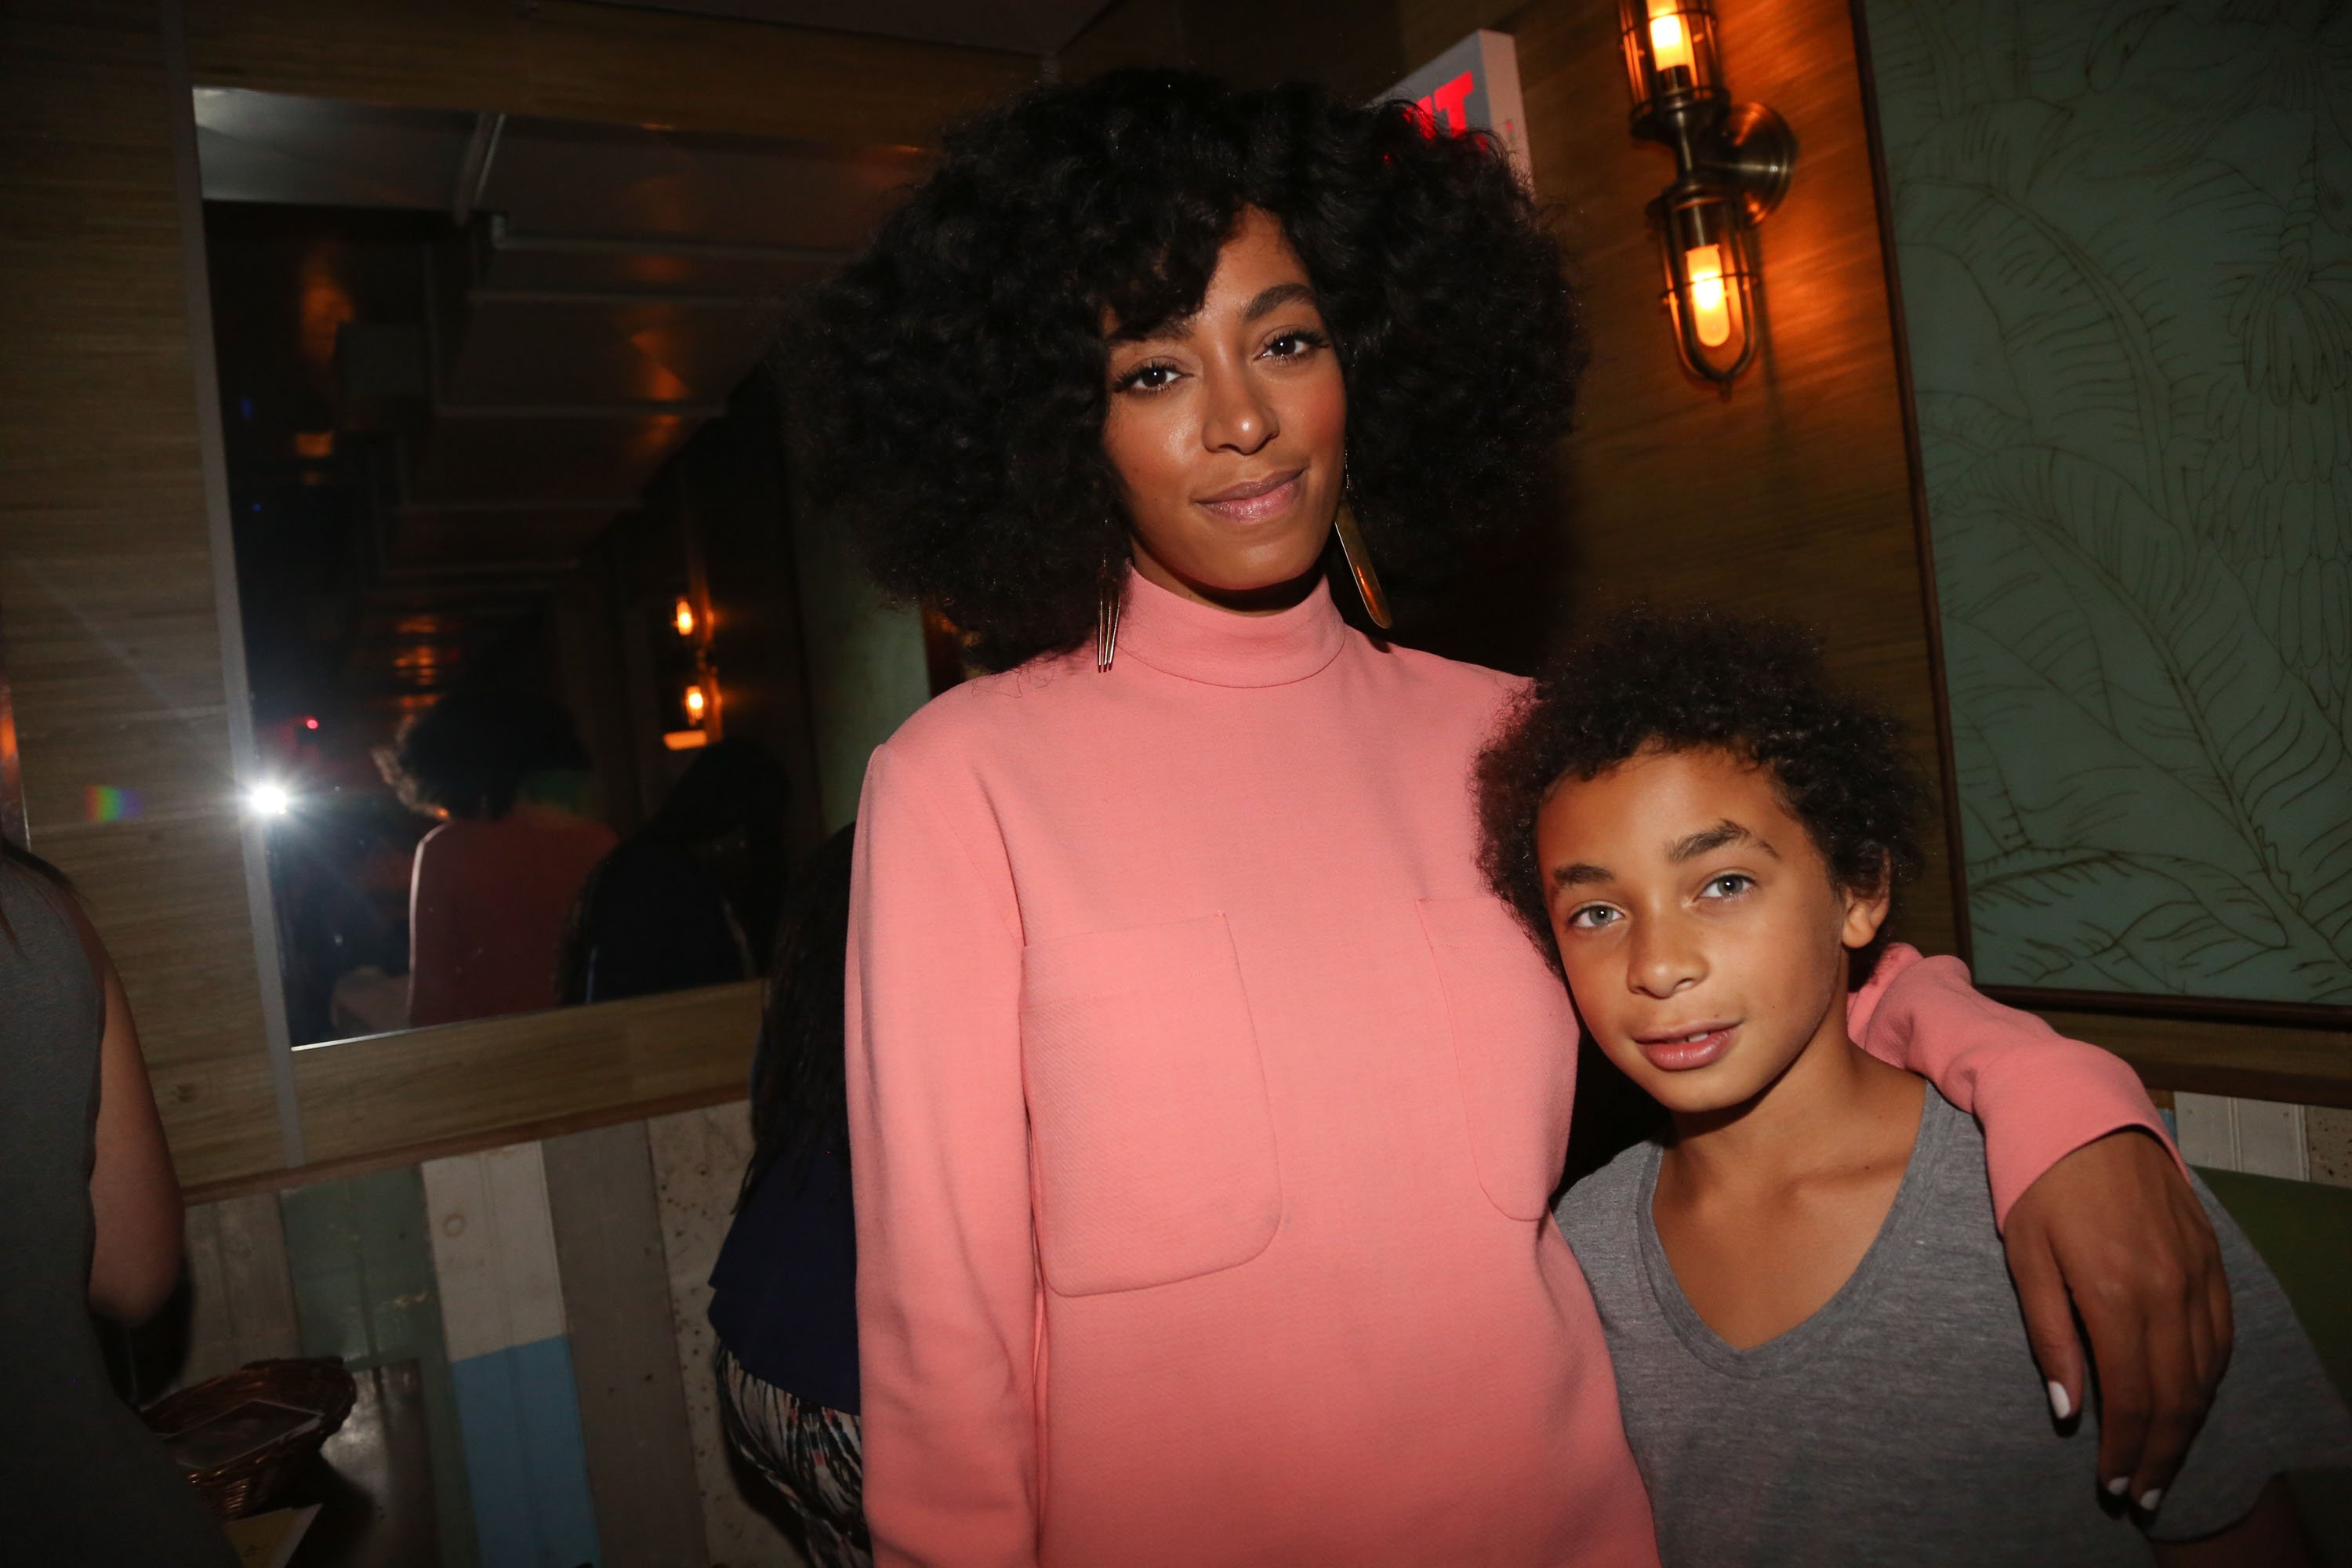 Solange and her son Daniel Julez J. Smith, Jr at the Solange and 14+ Foundation Partnership Party on May 4, 2014, in the Brooklyn borough of New York City | Photo: Johnny Nunez/WireImage/Getty Images